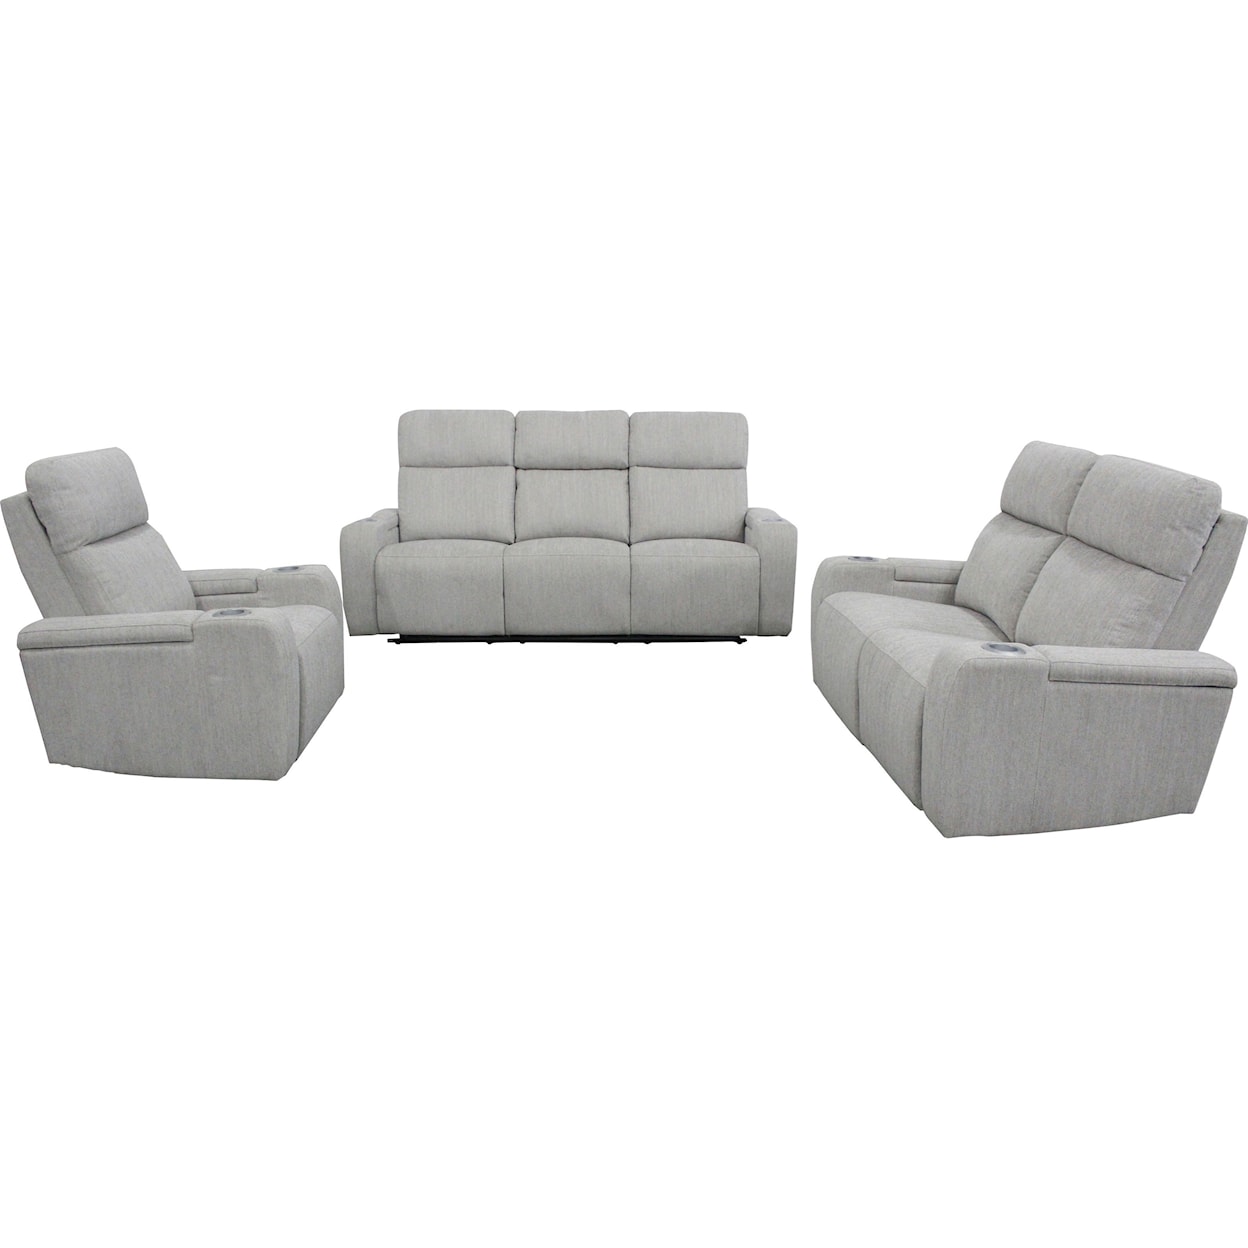 Paramount Living Orpheus Reclining Living Room Group